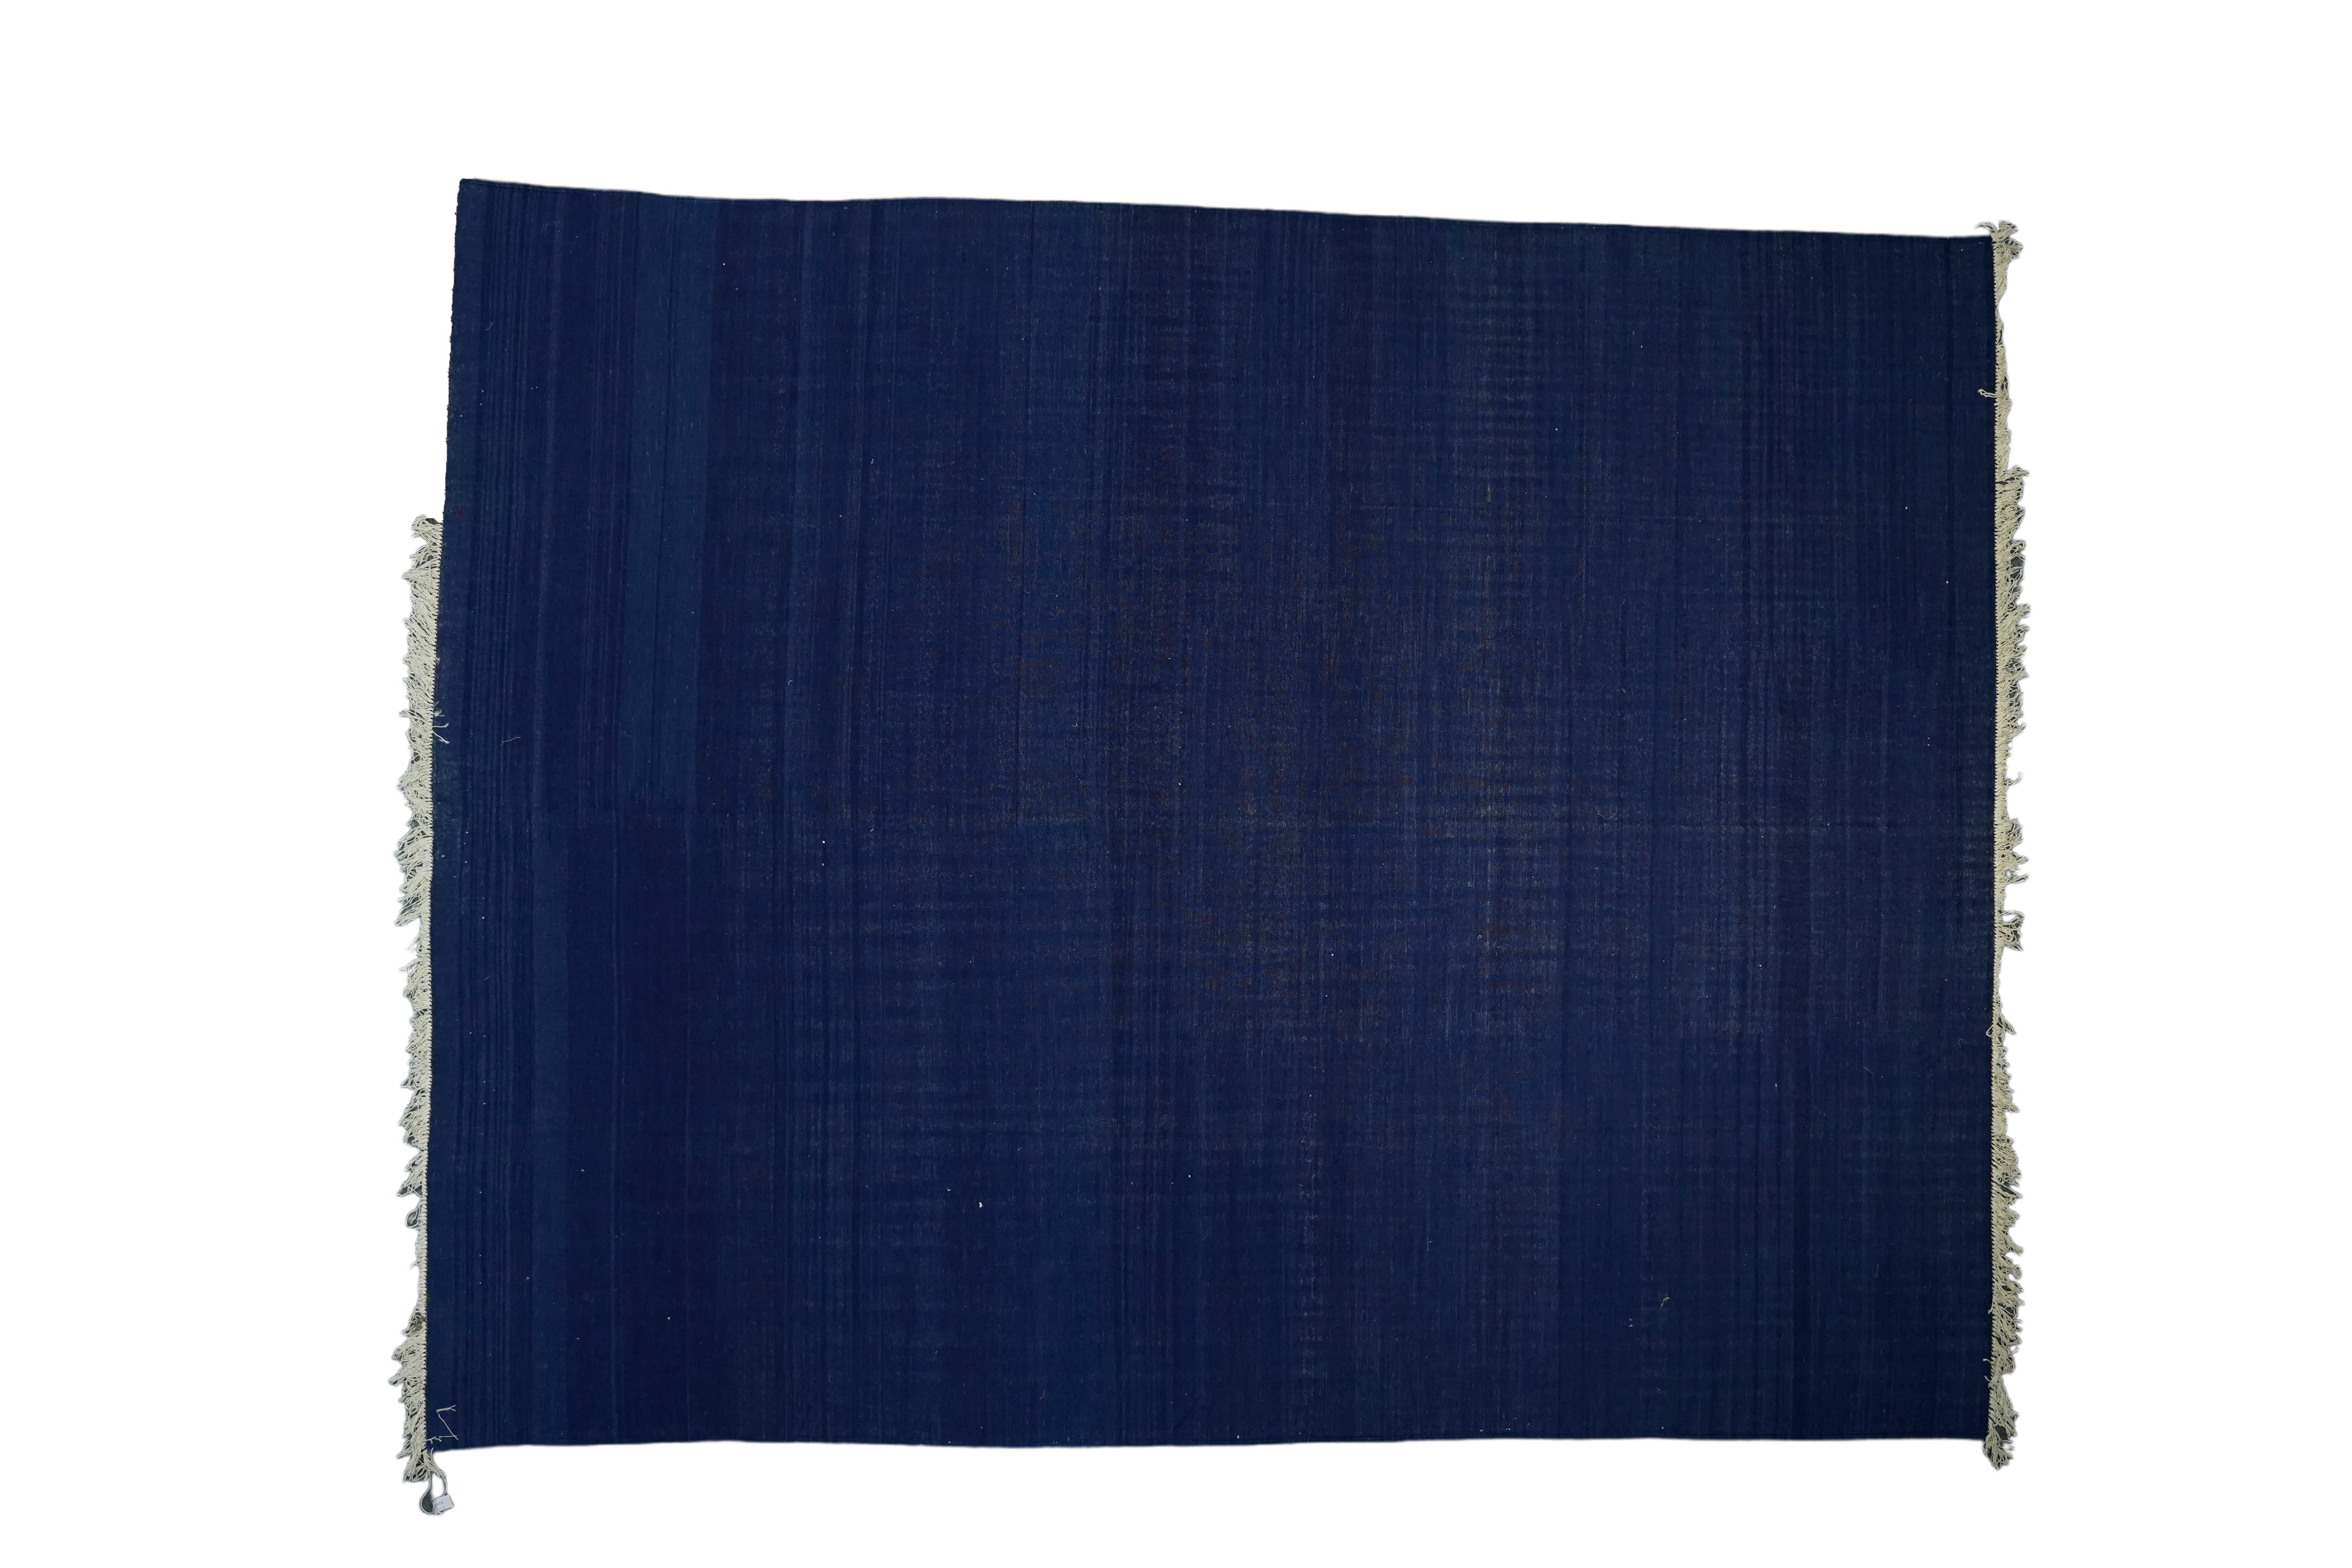 Hand-Woven Vintage Dhurrie Rug in Indigo Blue Tones with Natural Abrash, from Rug & Kilim For Sale